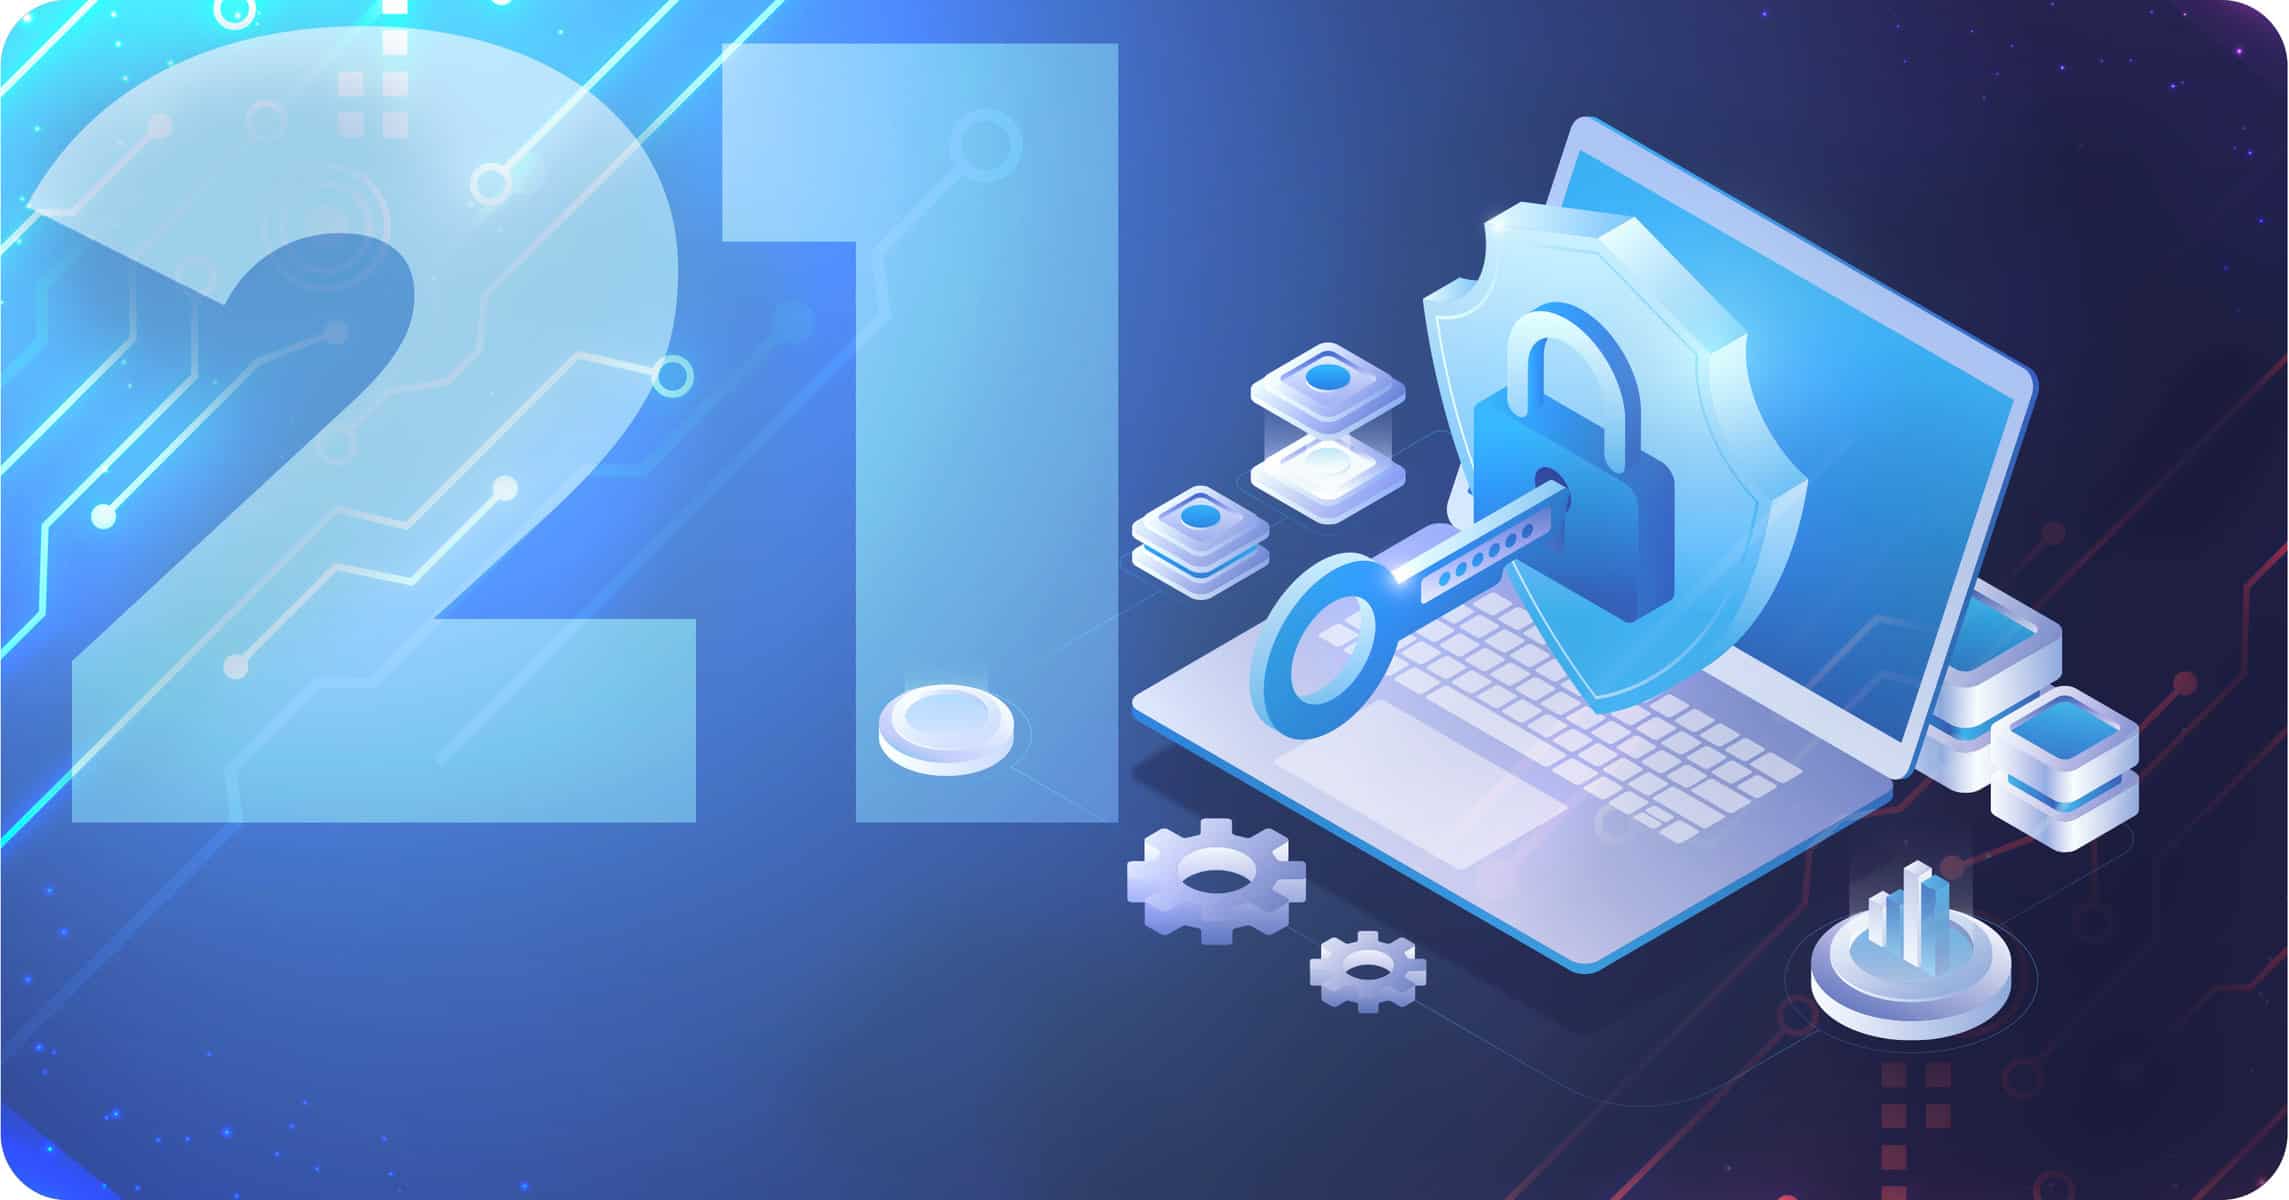 21 basic computer security tips